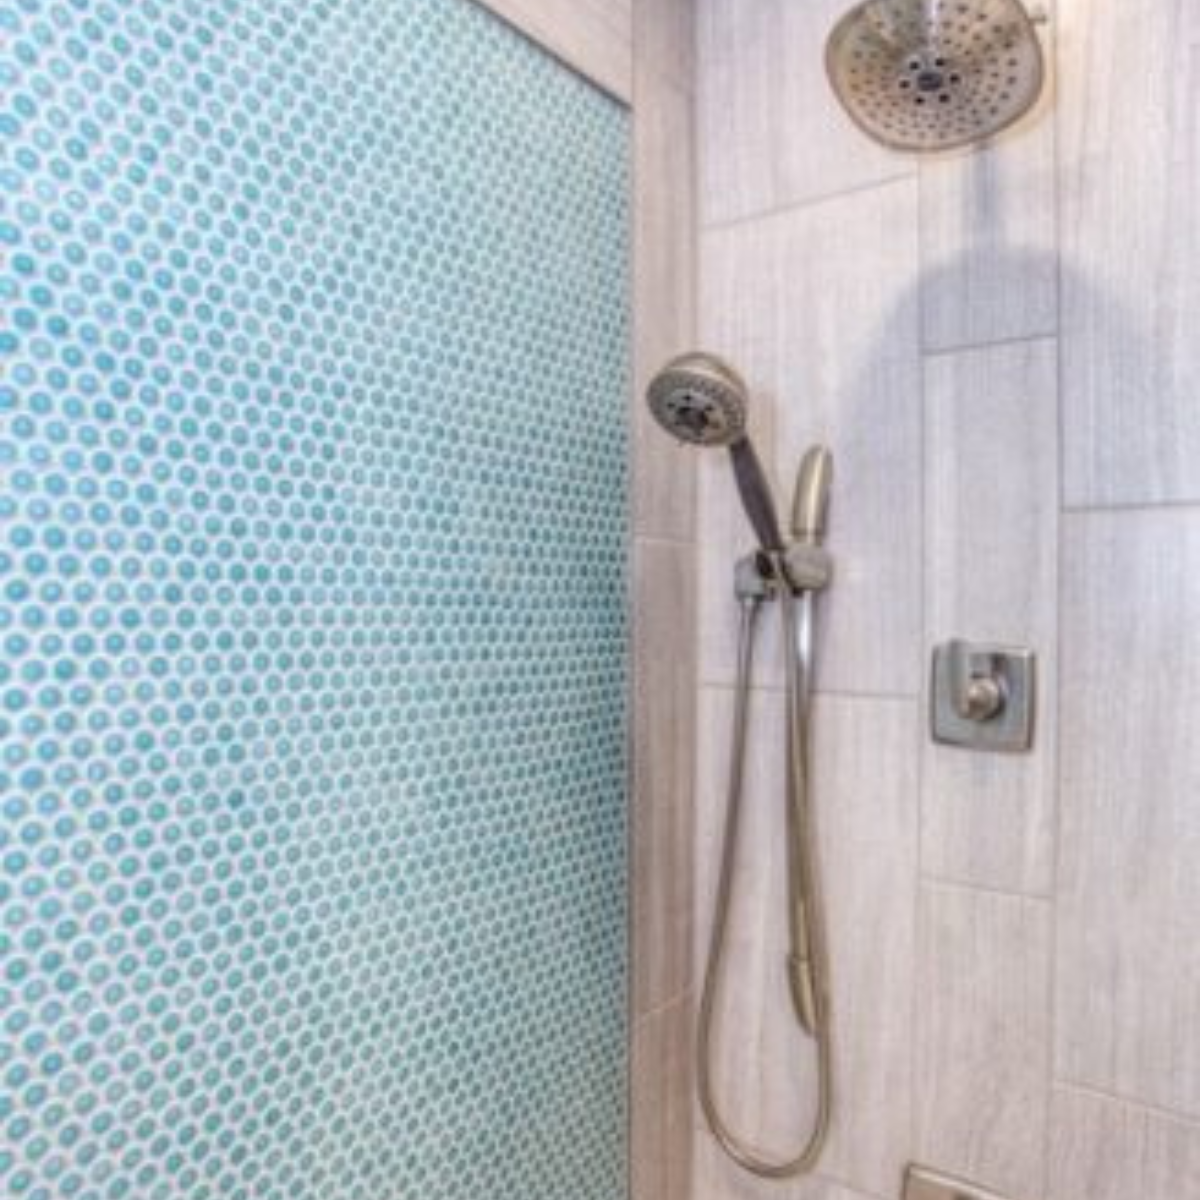 Shower tile on the back wall and tile behind faucet and shower head